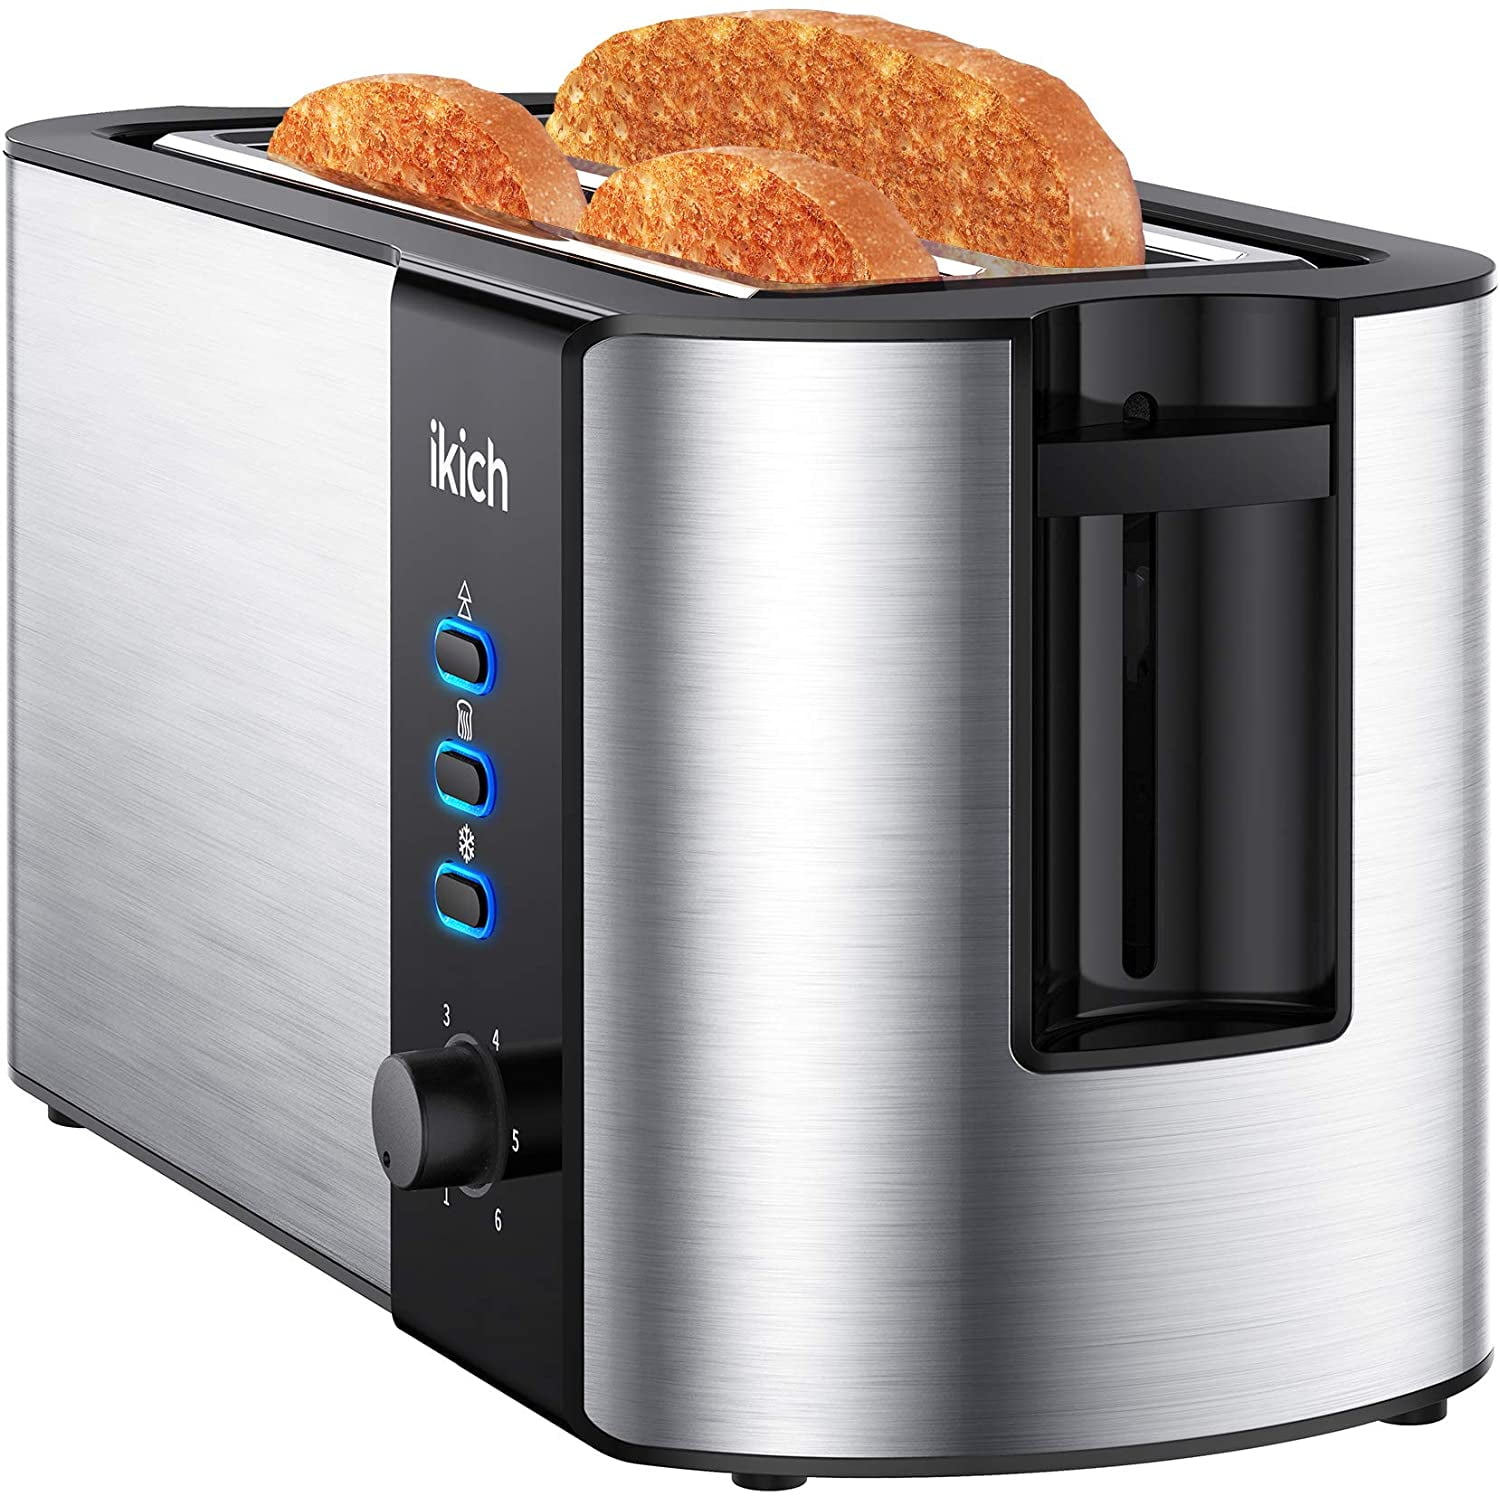 1300W 4 SLICE WHITE ELECTRIC TOASTER BROWNING CONTROL CRUMB TRAY BREAKFAST BREAD 